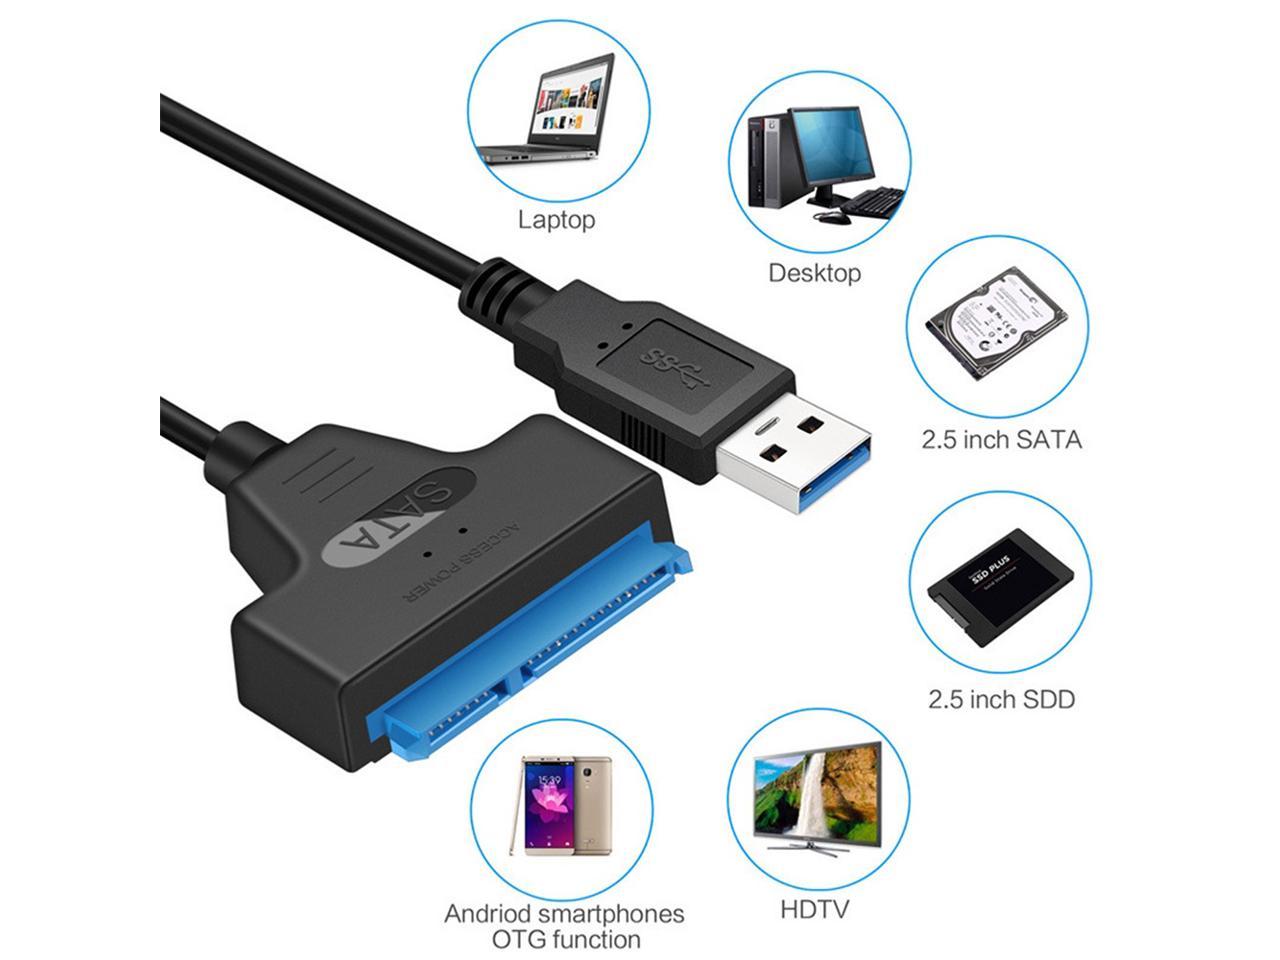 ZKxl8ca USB 2.0 to SATA 22Pin Adapter Cable Cord for 2.5 Inch HDD Laptop Hard Drive